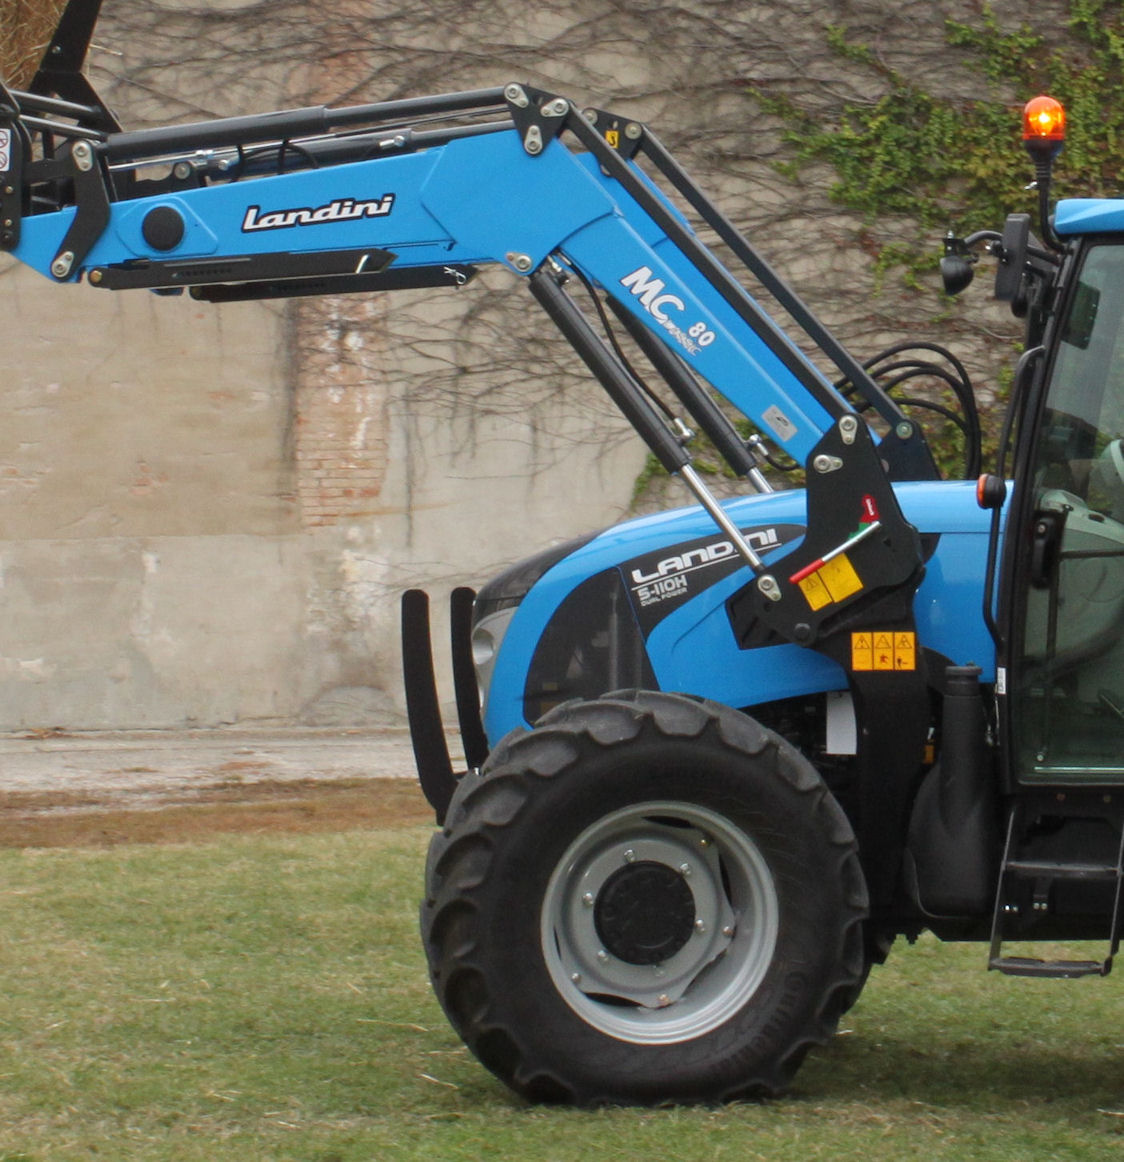 Double-acting lift cylinders are fitted to MClassic and MPower models – so the loader can power-down as well as lift – and the versatile Euro implement carriage is standard.